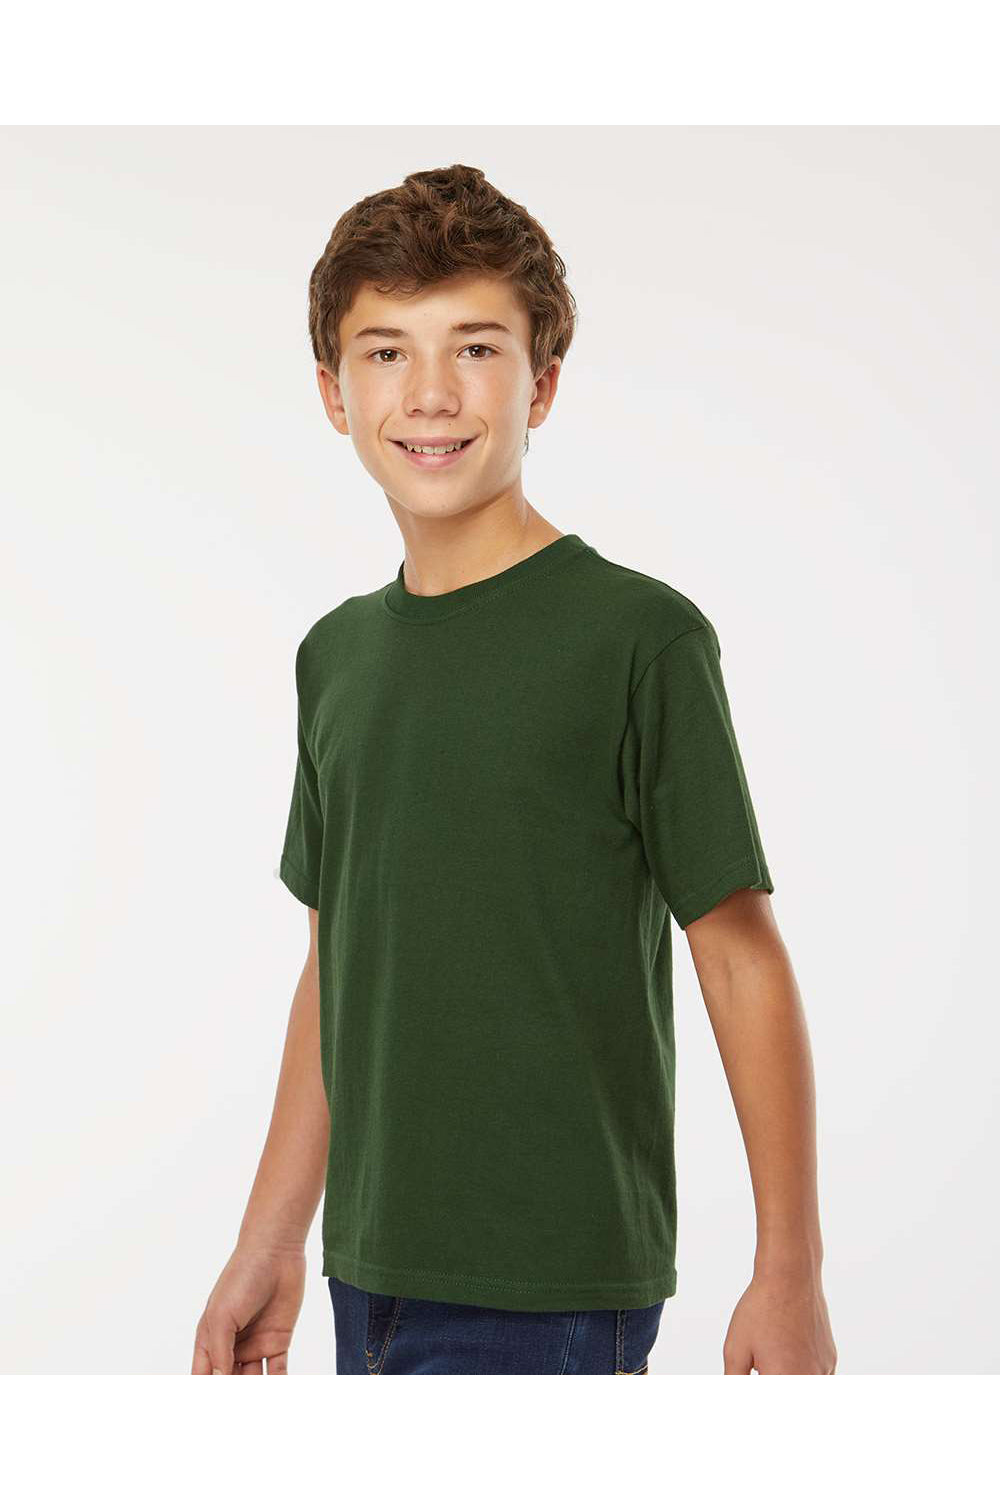 M&O 4850 Youth Gold Soft Touch Short Sleeve Crewneck T-Shirt Forest Green Model Side